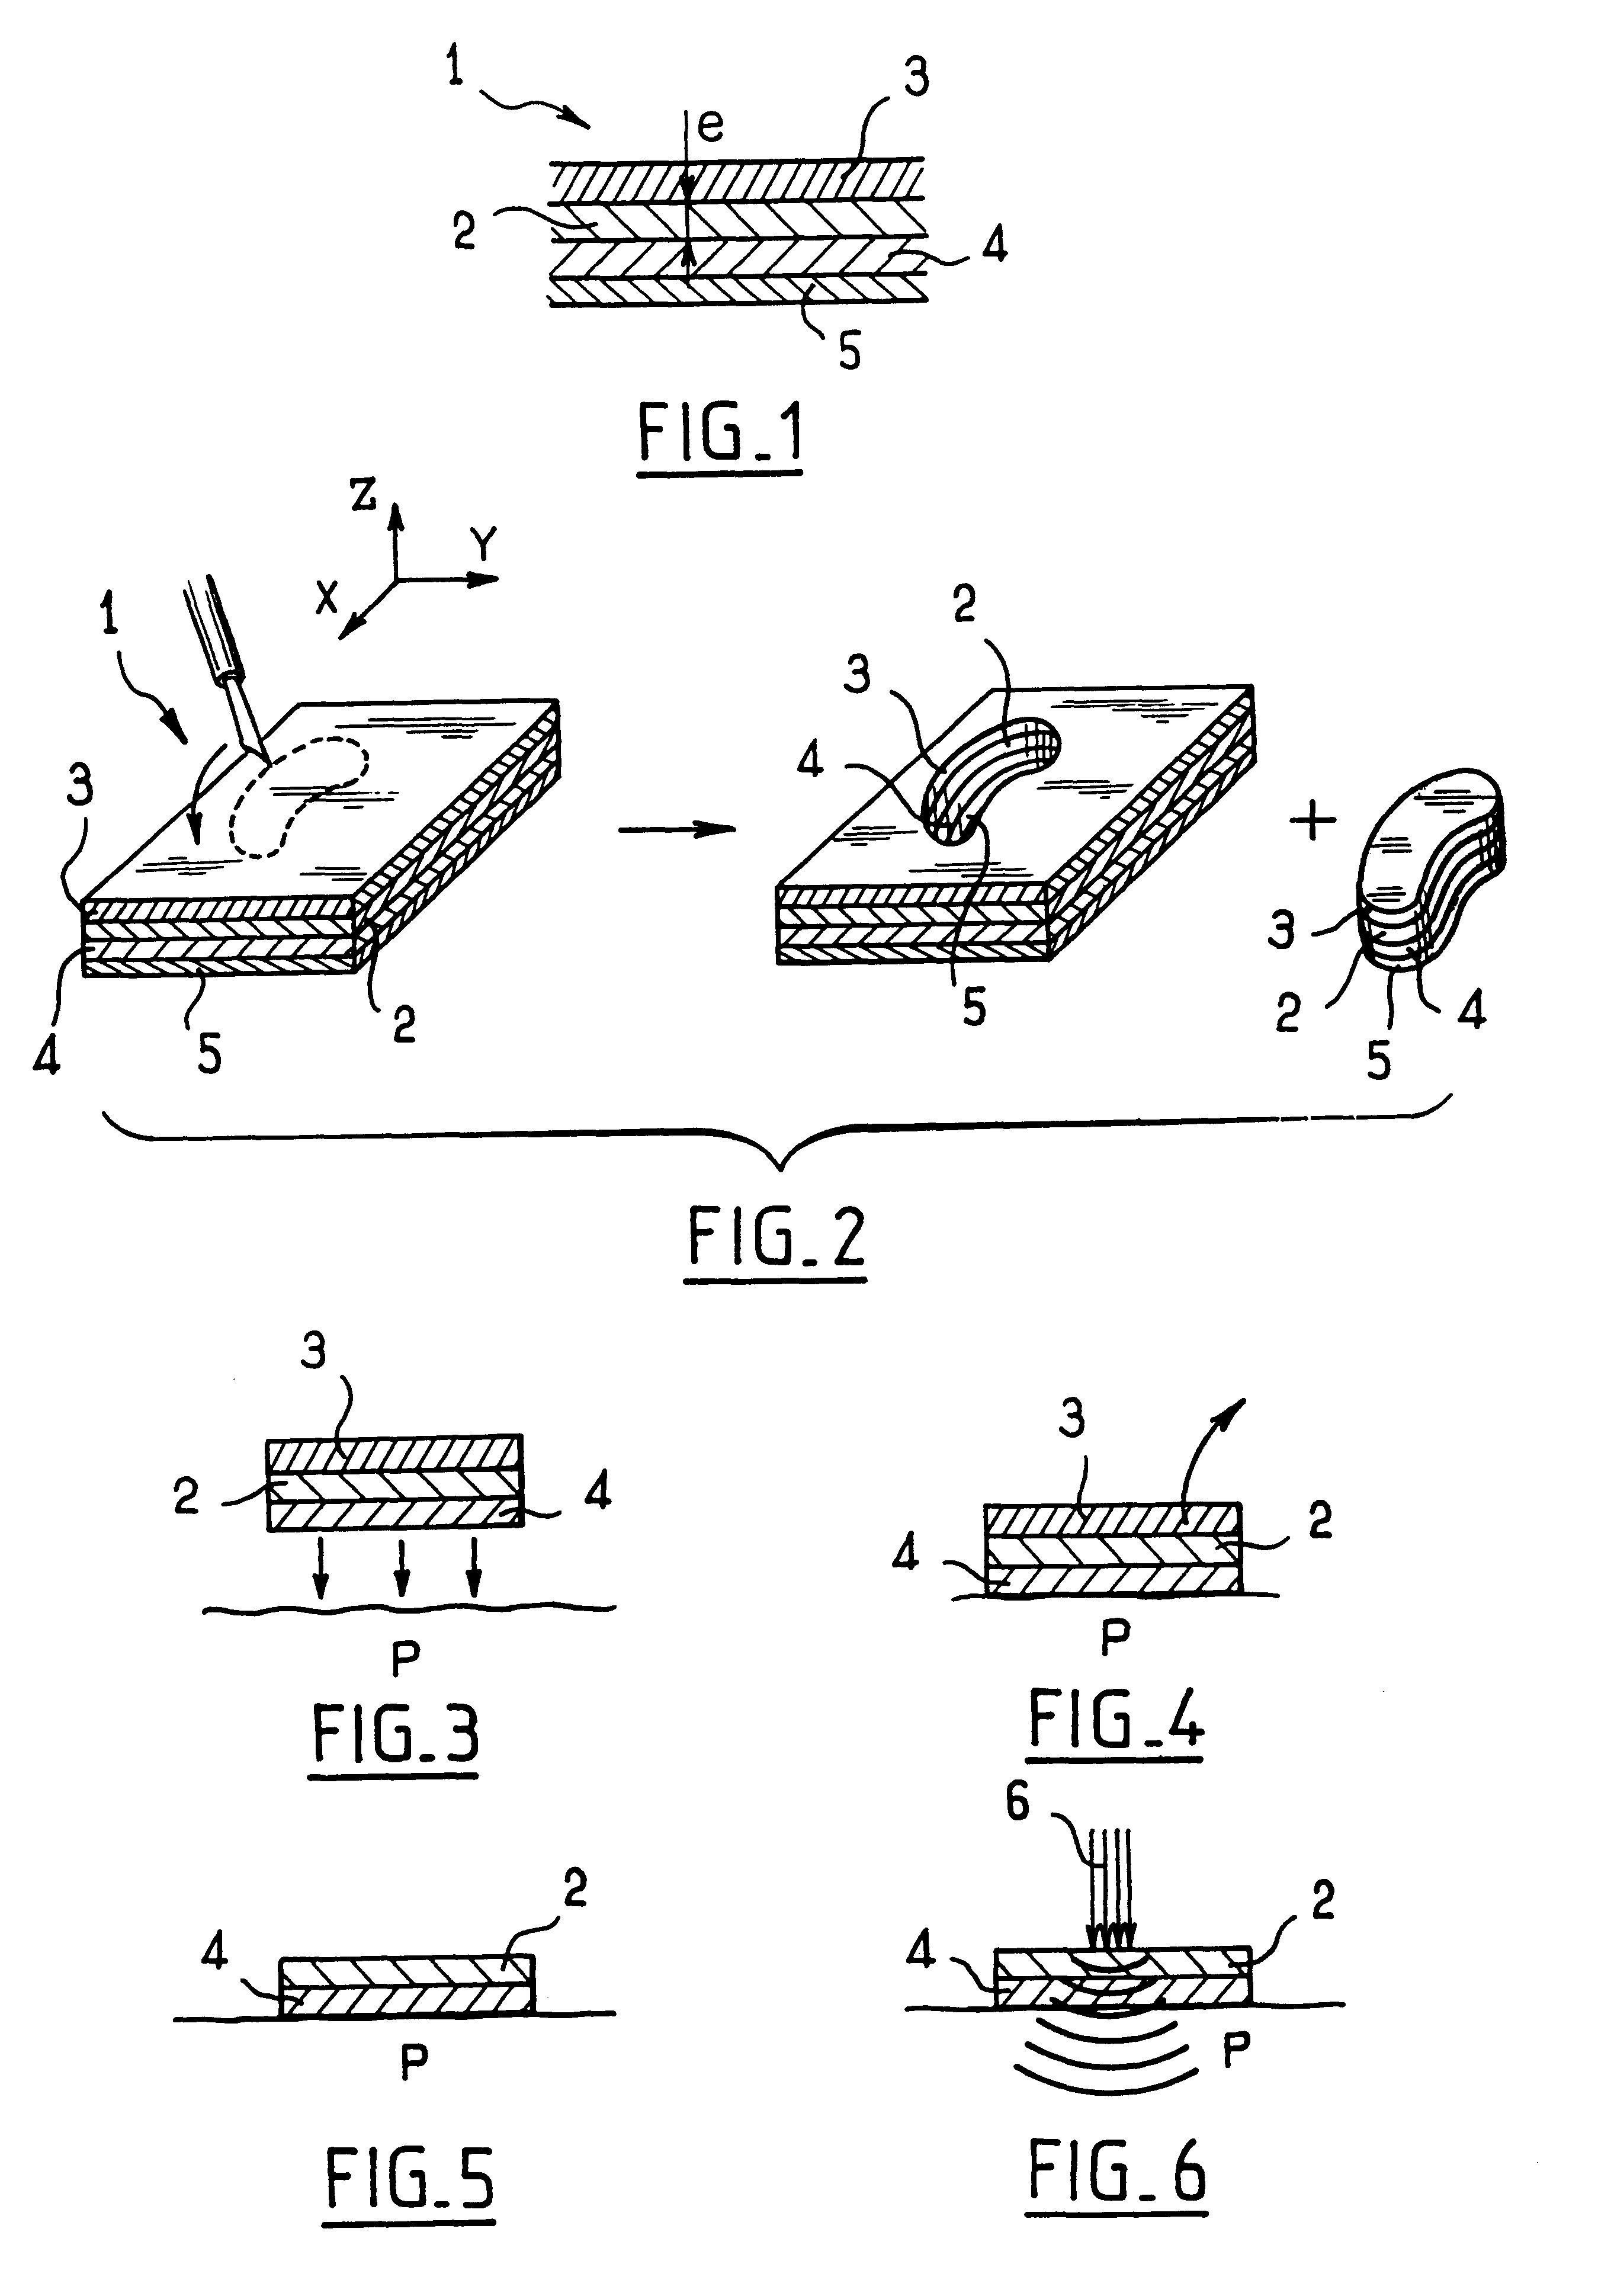 Device including a chromophoric composition to be applied to the skin, a method of fabricating such a device, and uses therefor